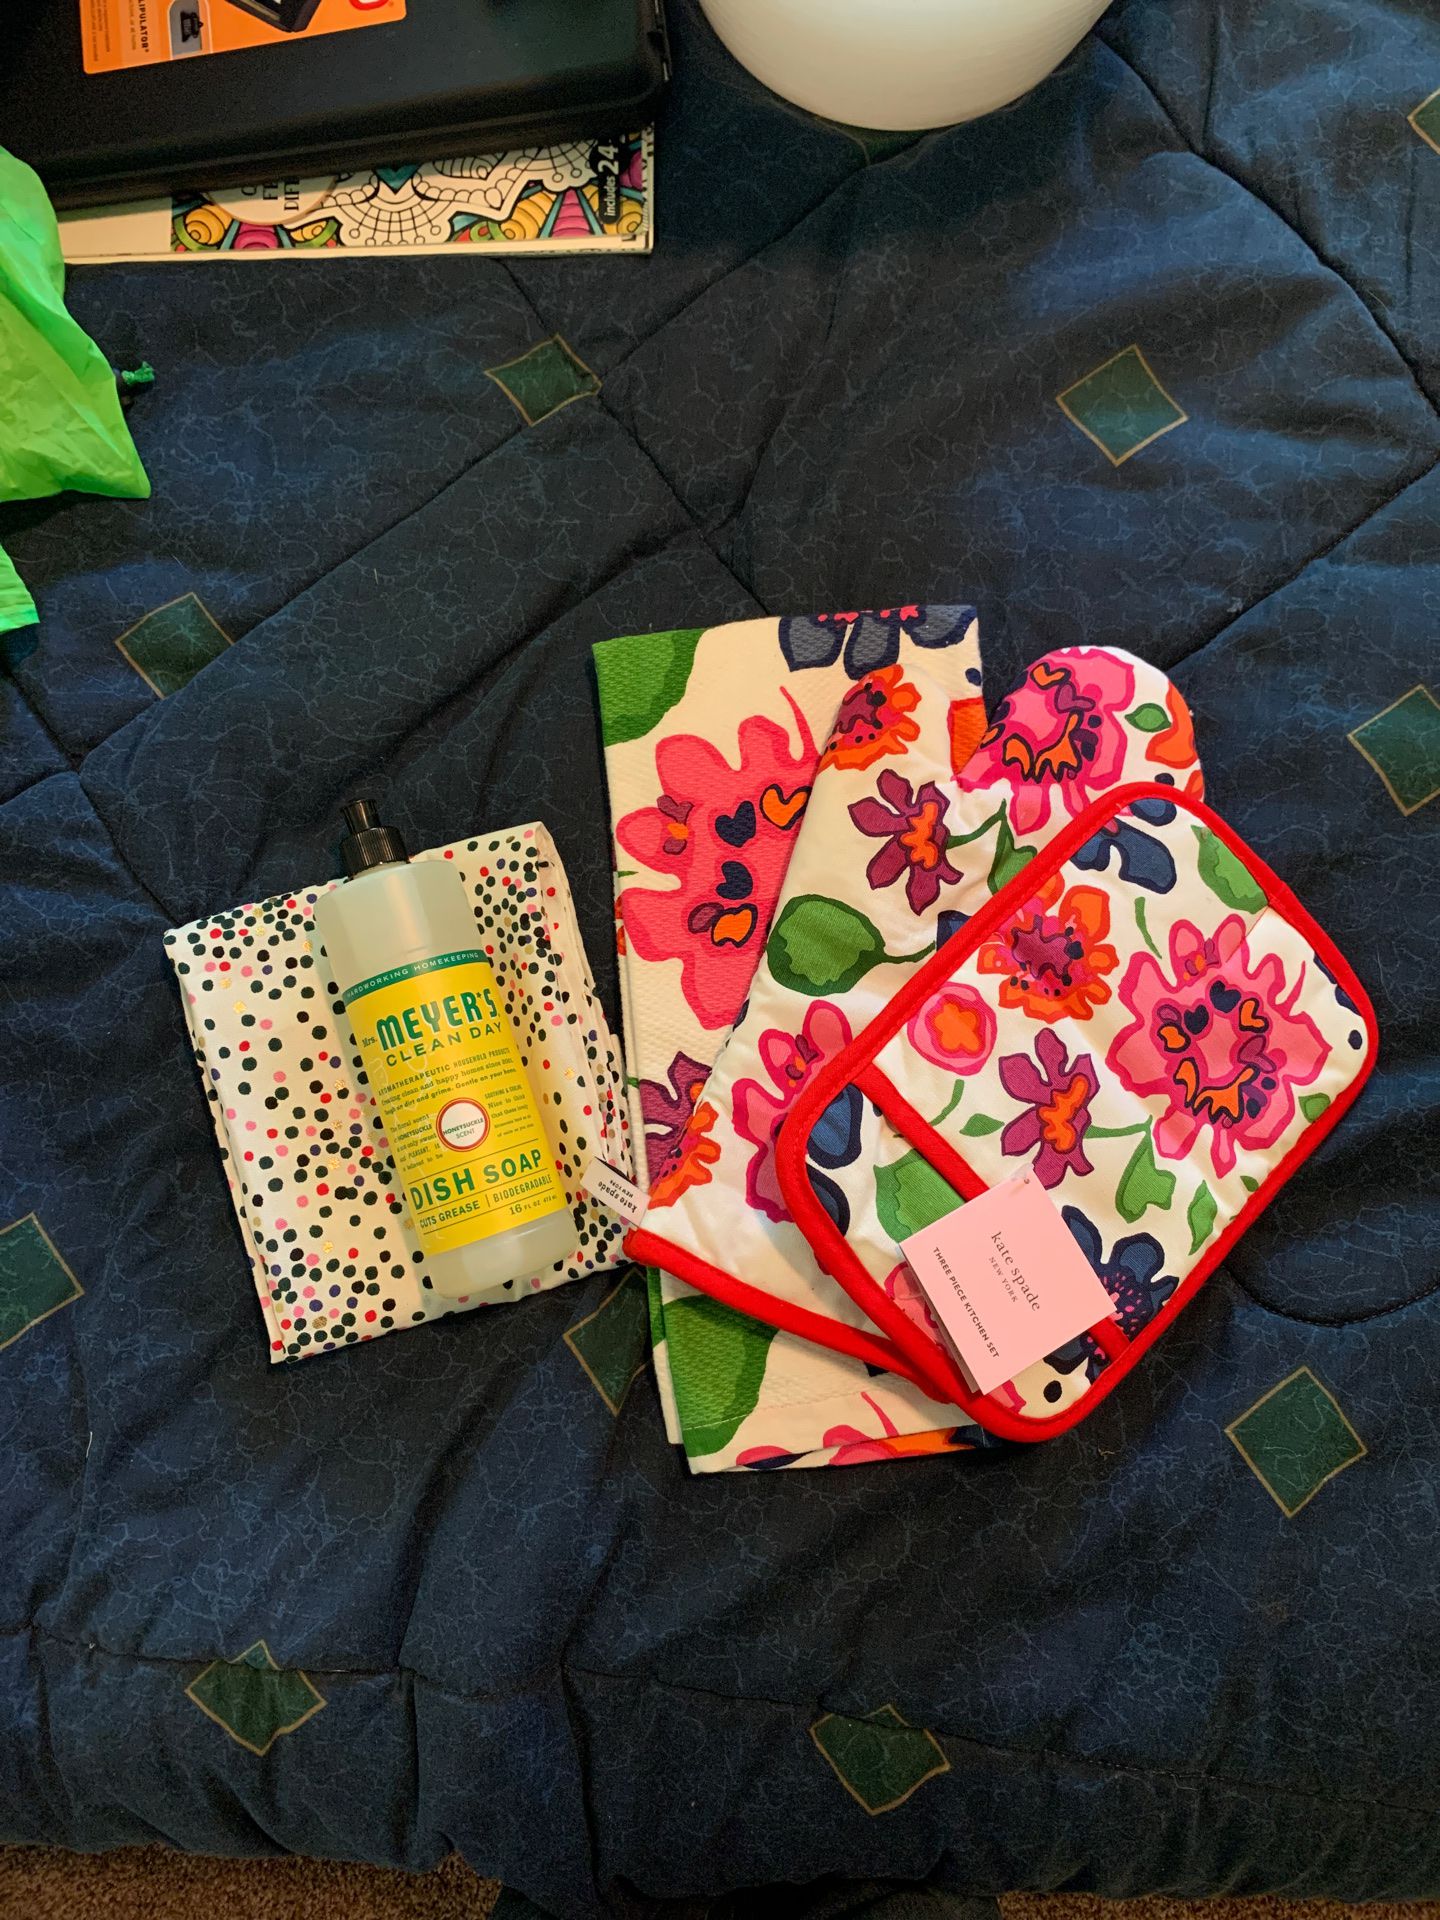 Brand New Kate Spade dish Towel Set with Oven Mit and Meyers Dish Soap